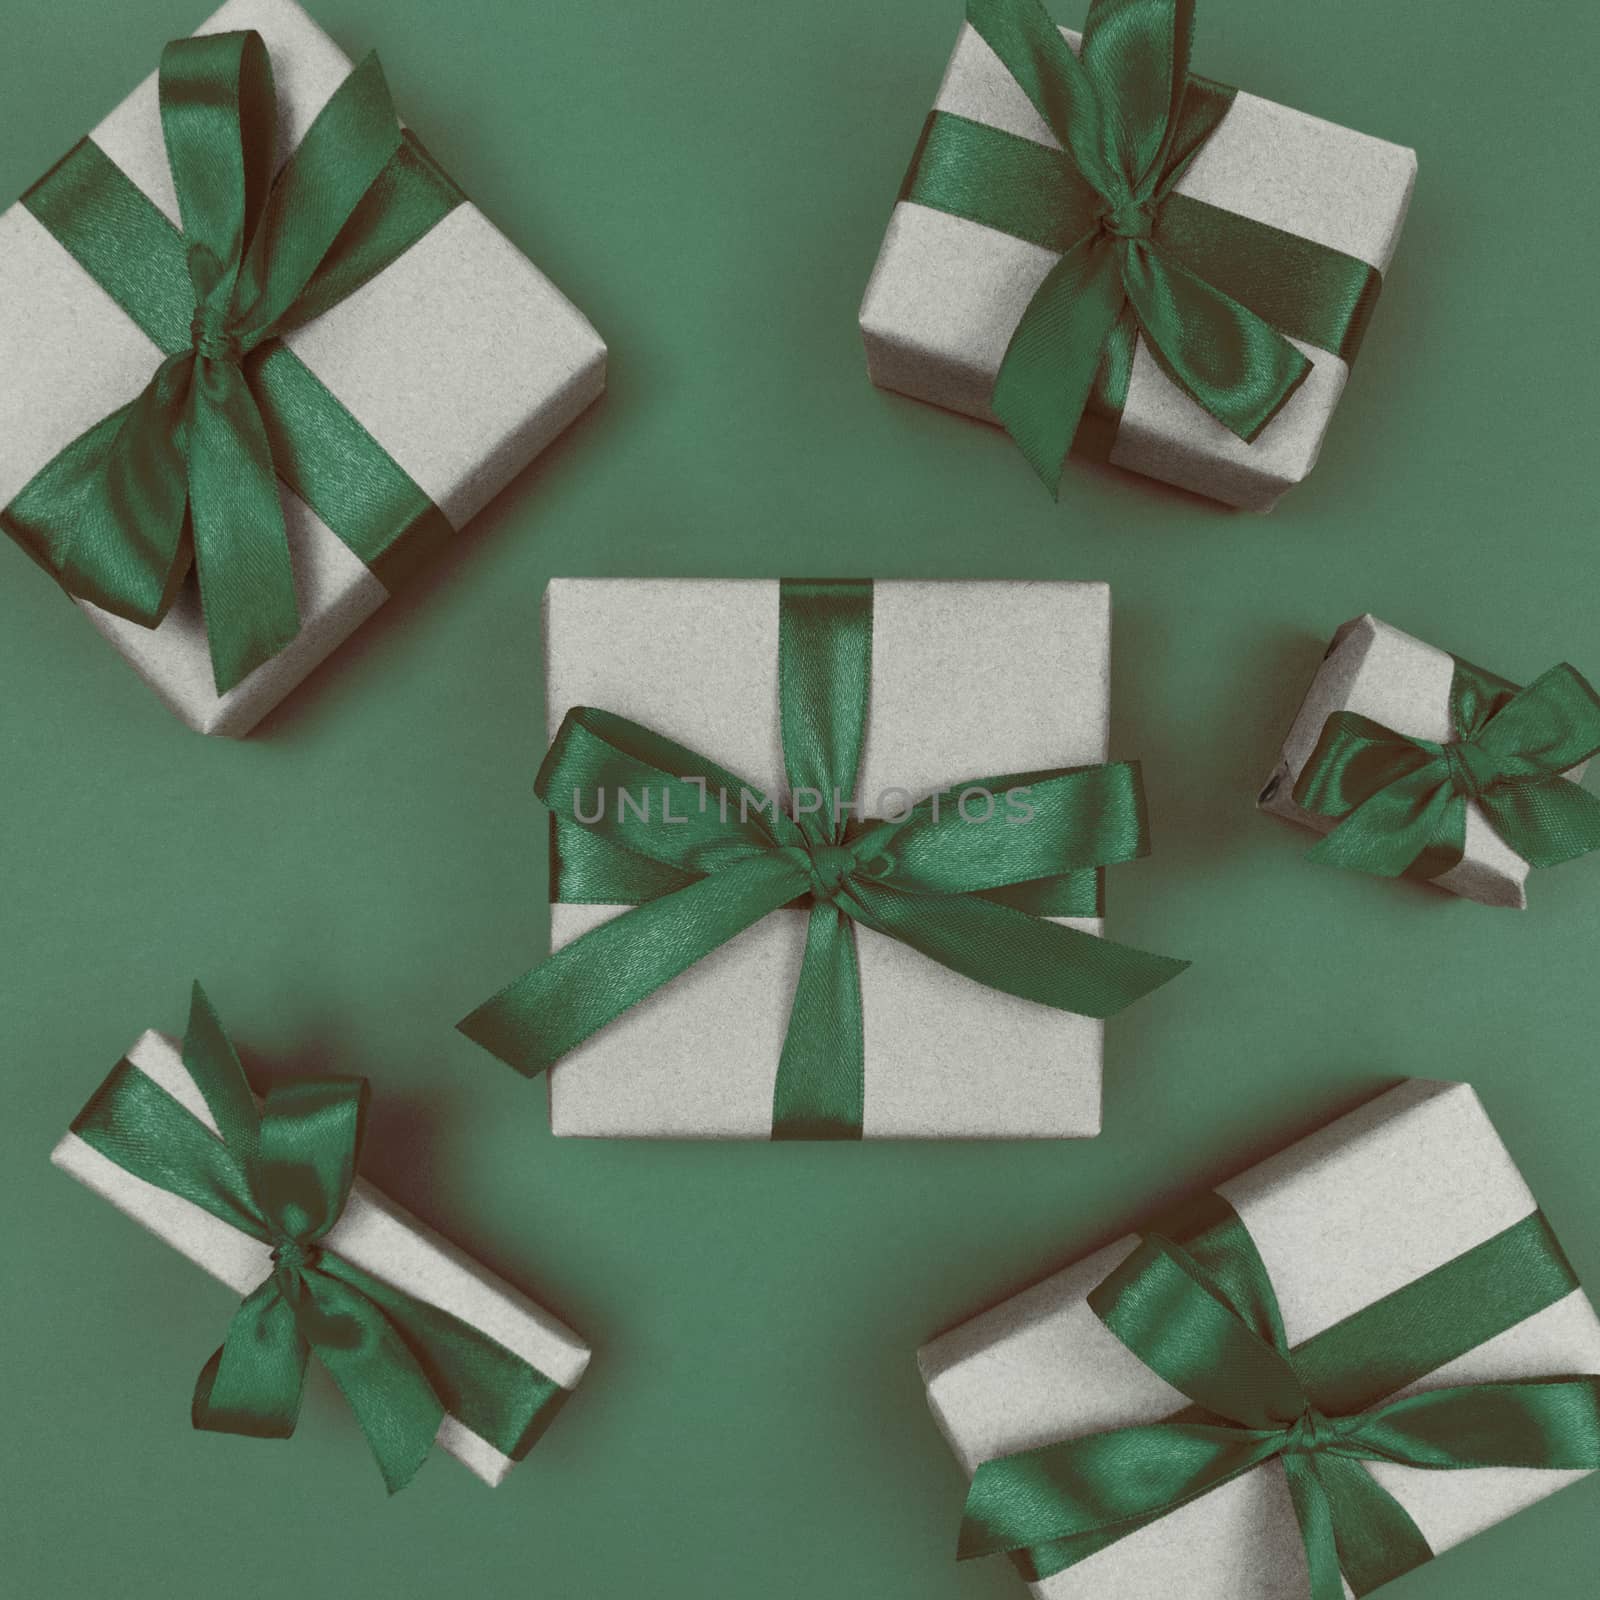 Gift boxes wrapped in a craft paper with green ribbons and bows. Festive monochrome flat lay.